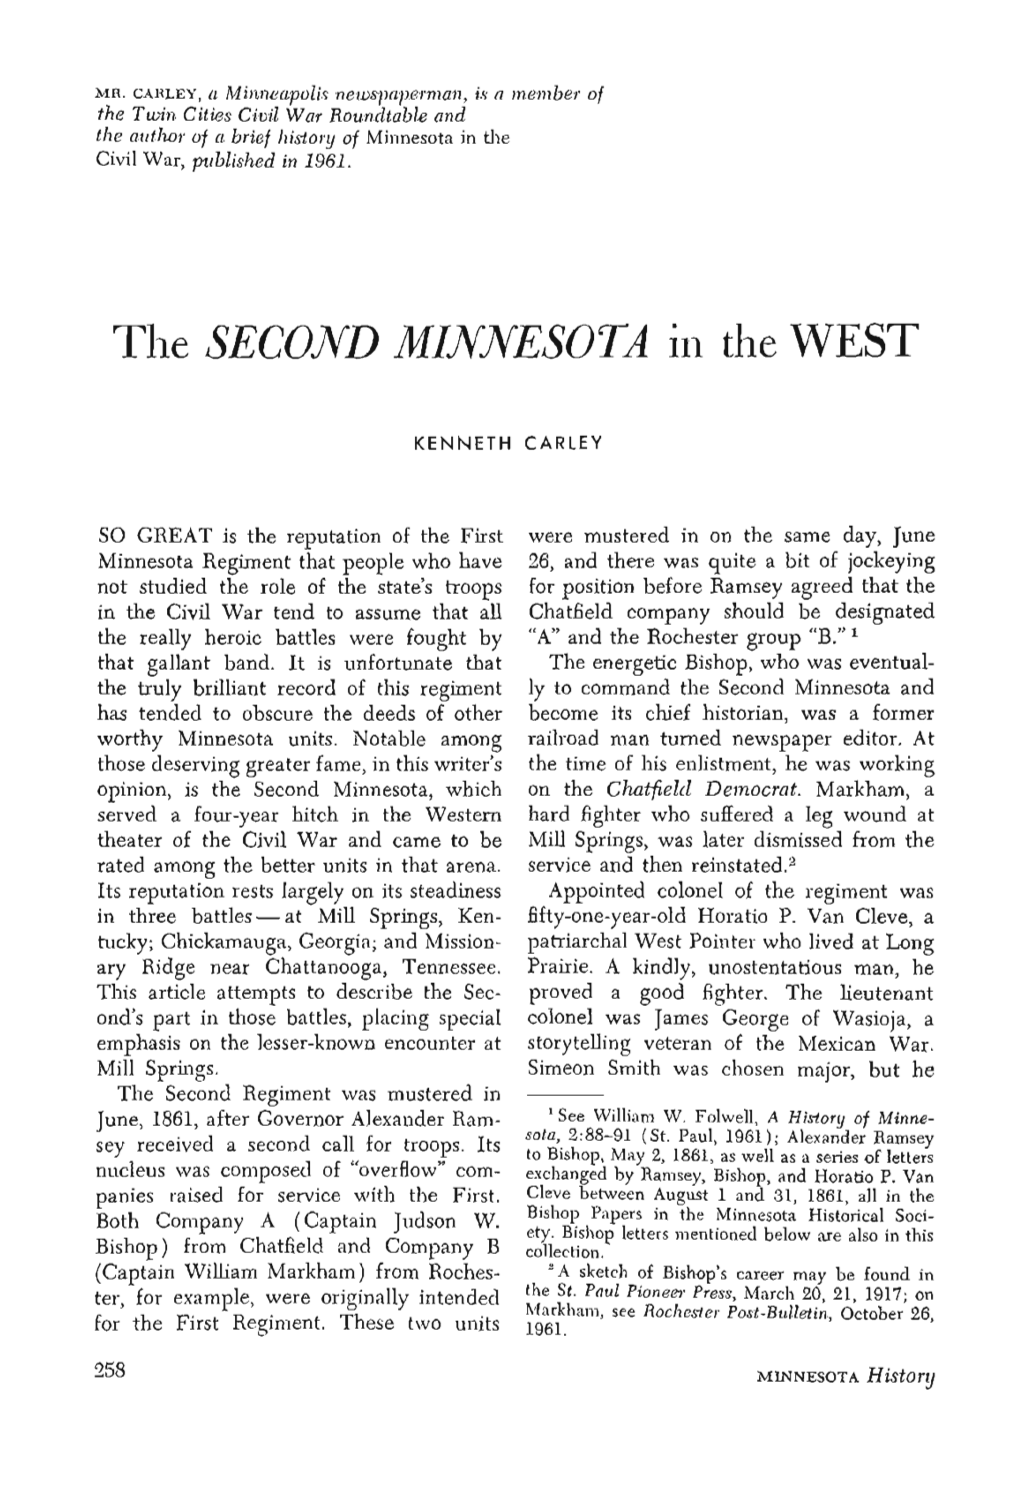 The Second Minnesota in the West